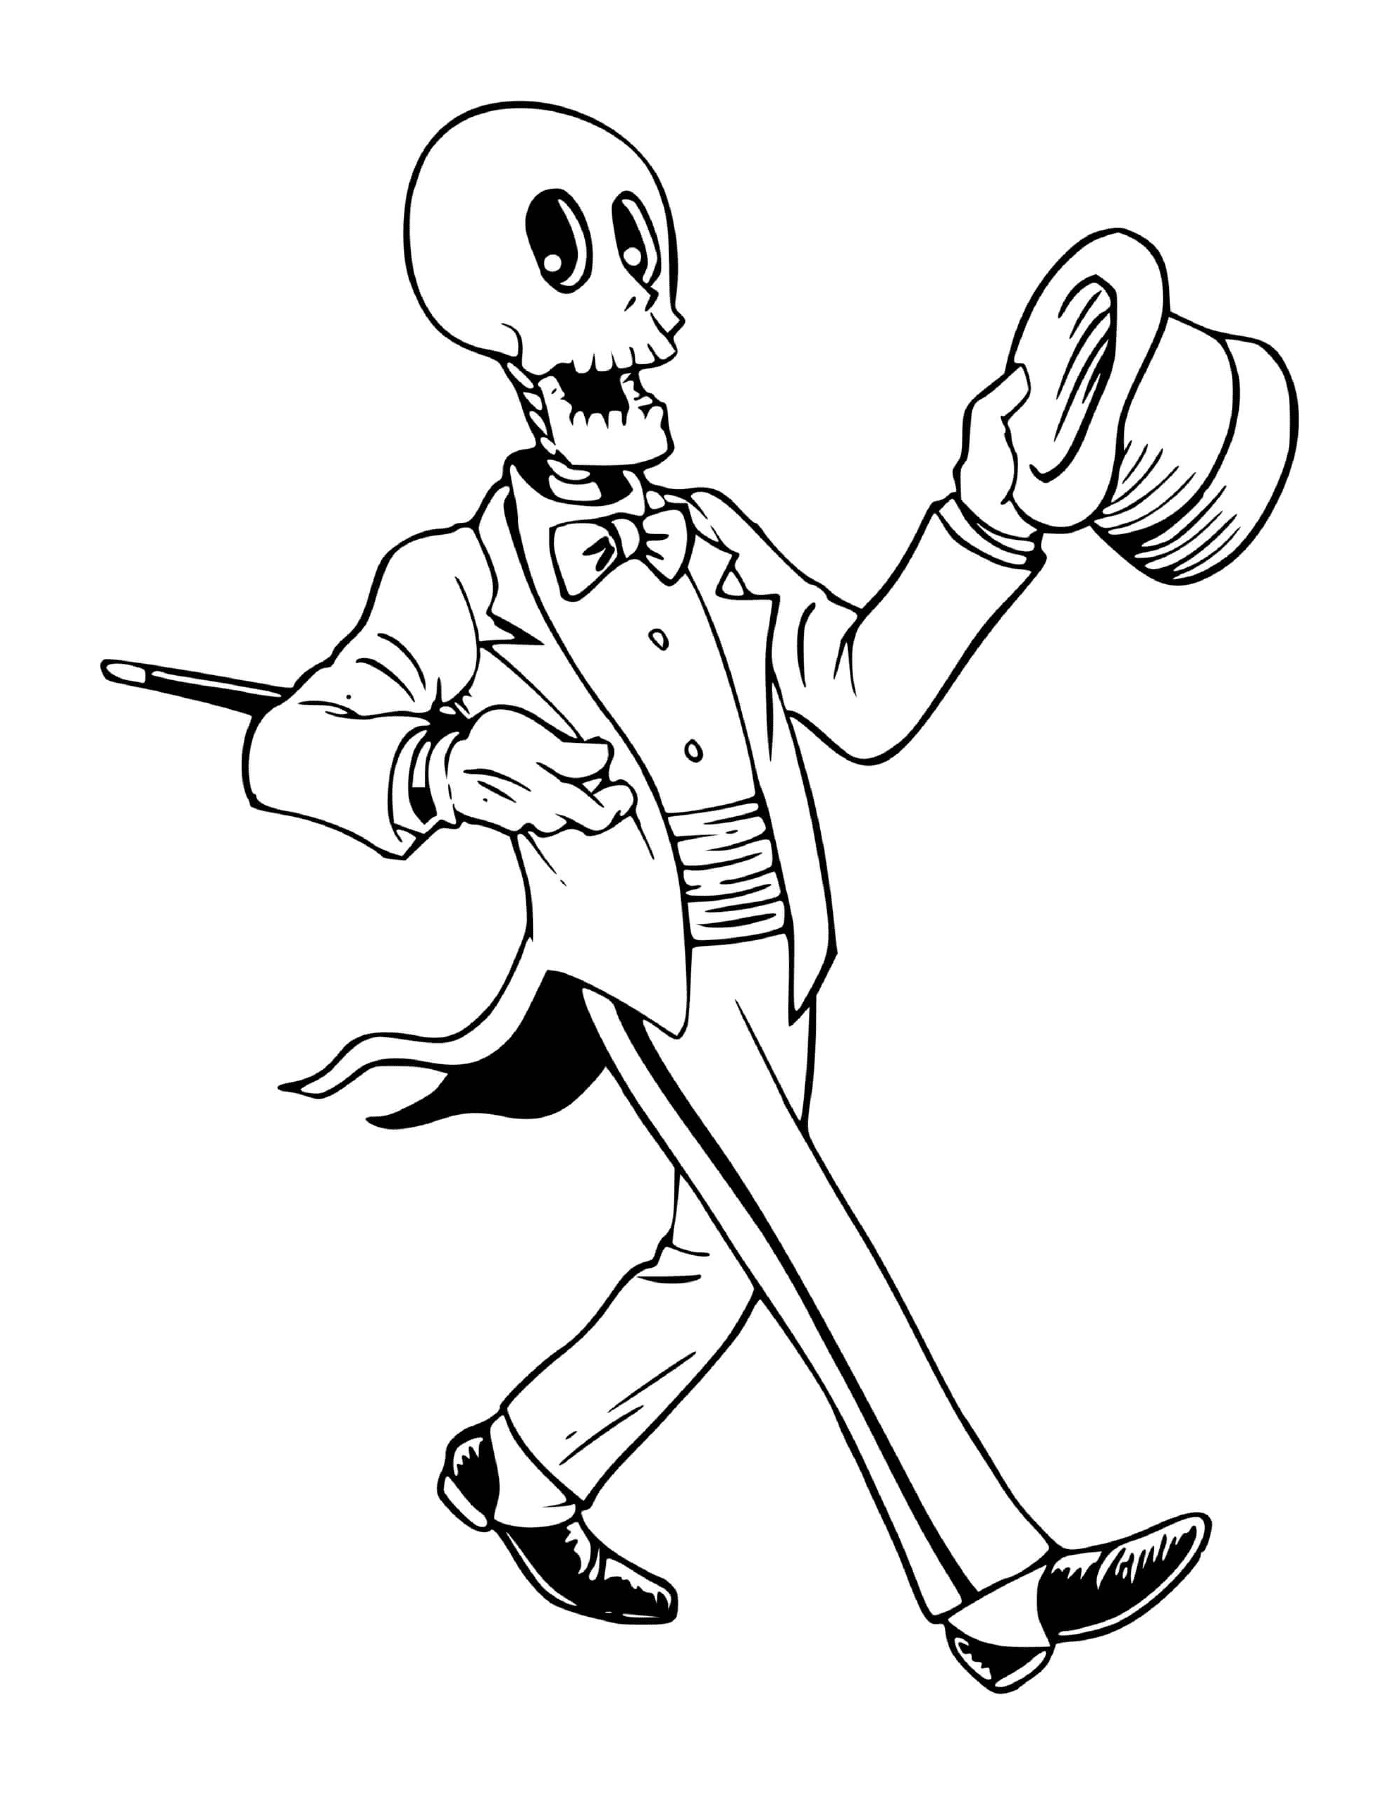  Funny Halloween Skeleton, wearing a costume and tie 